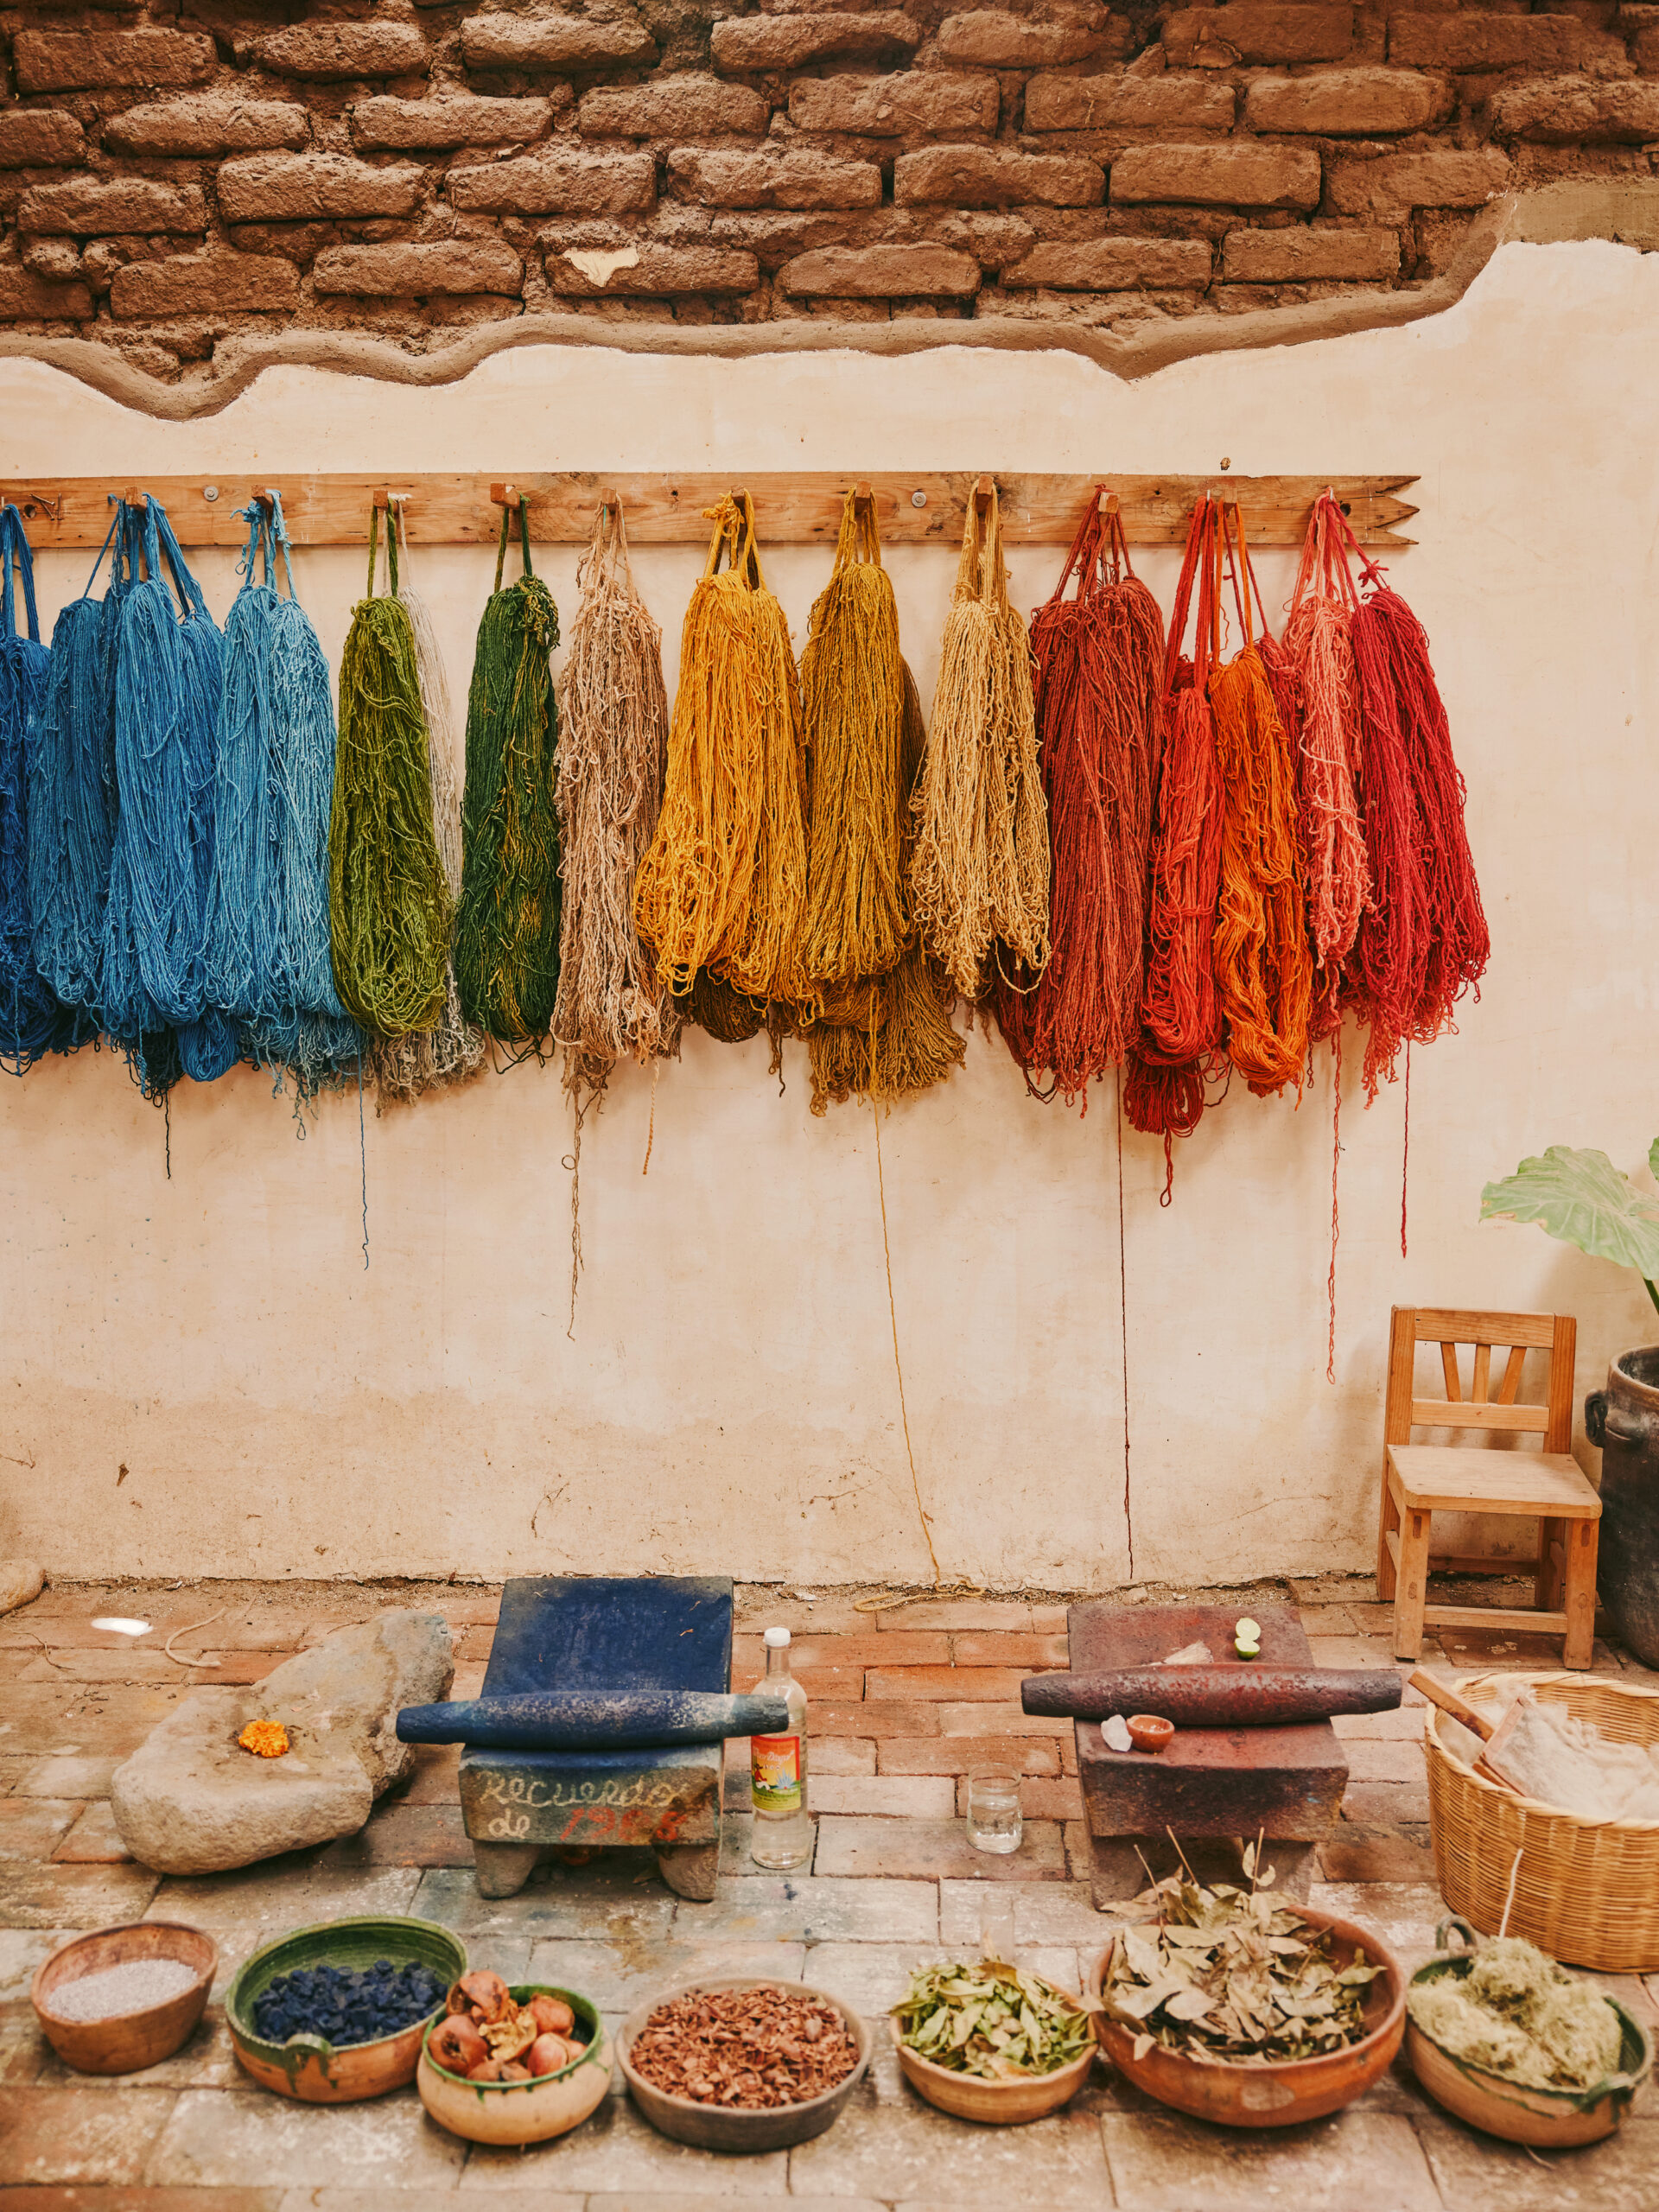 Colorful dyed yarns hanging to dry against plaster wall in Teotitlán del Valle, Mexico.